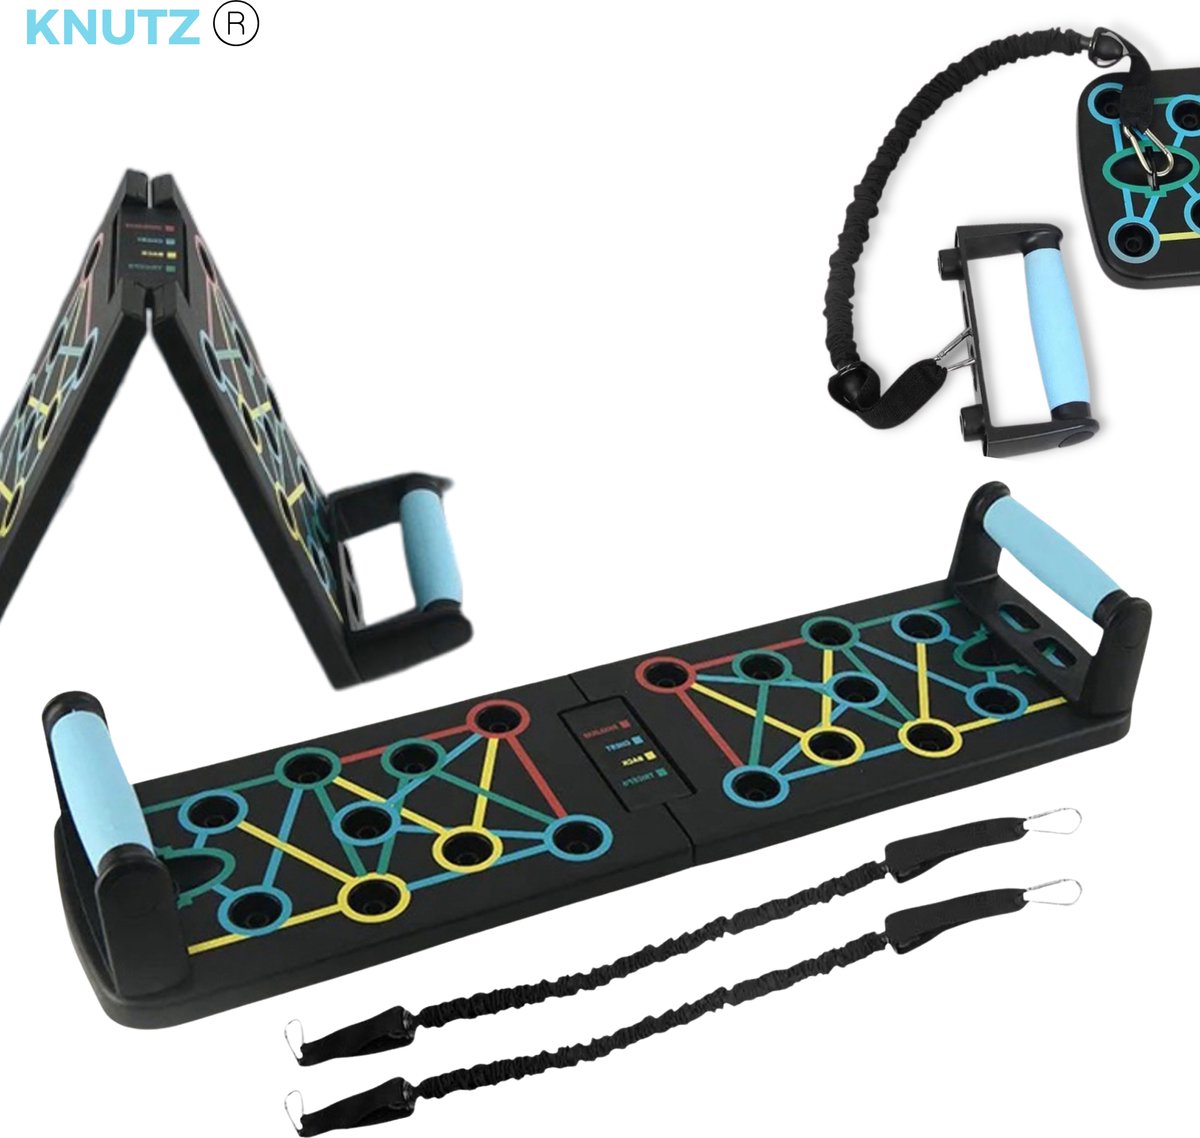 Knutz®- Push up bord - Push up grips - Push up bars - Push up Board- Home workout - Fitness set thuis -Fitness Plank- 12 in 1